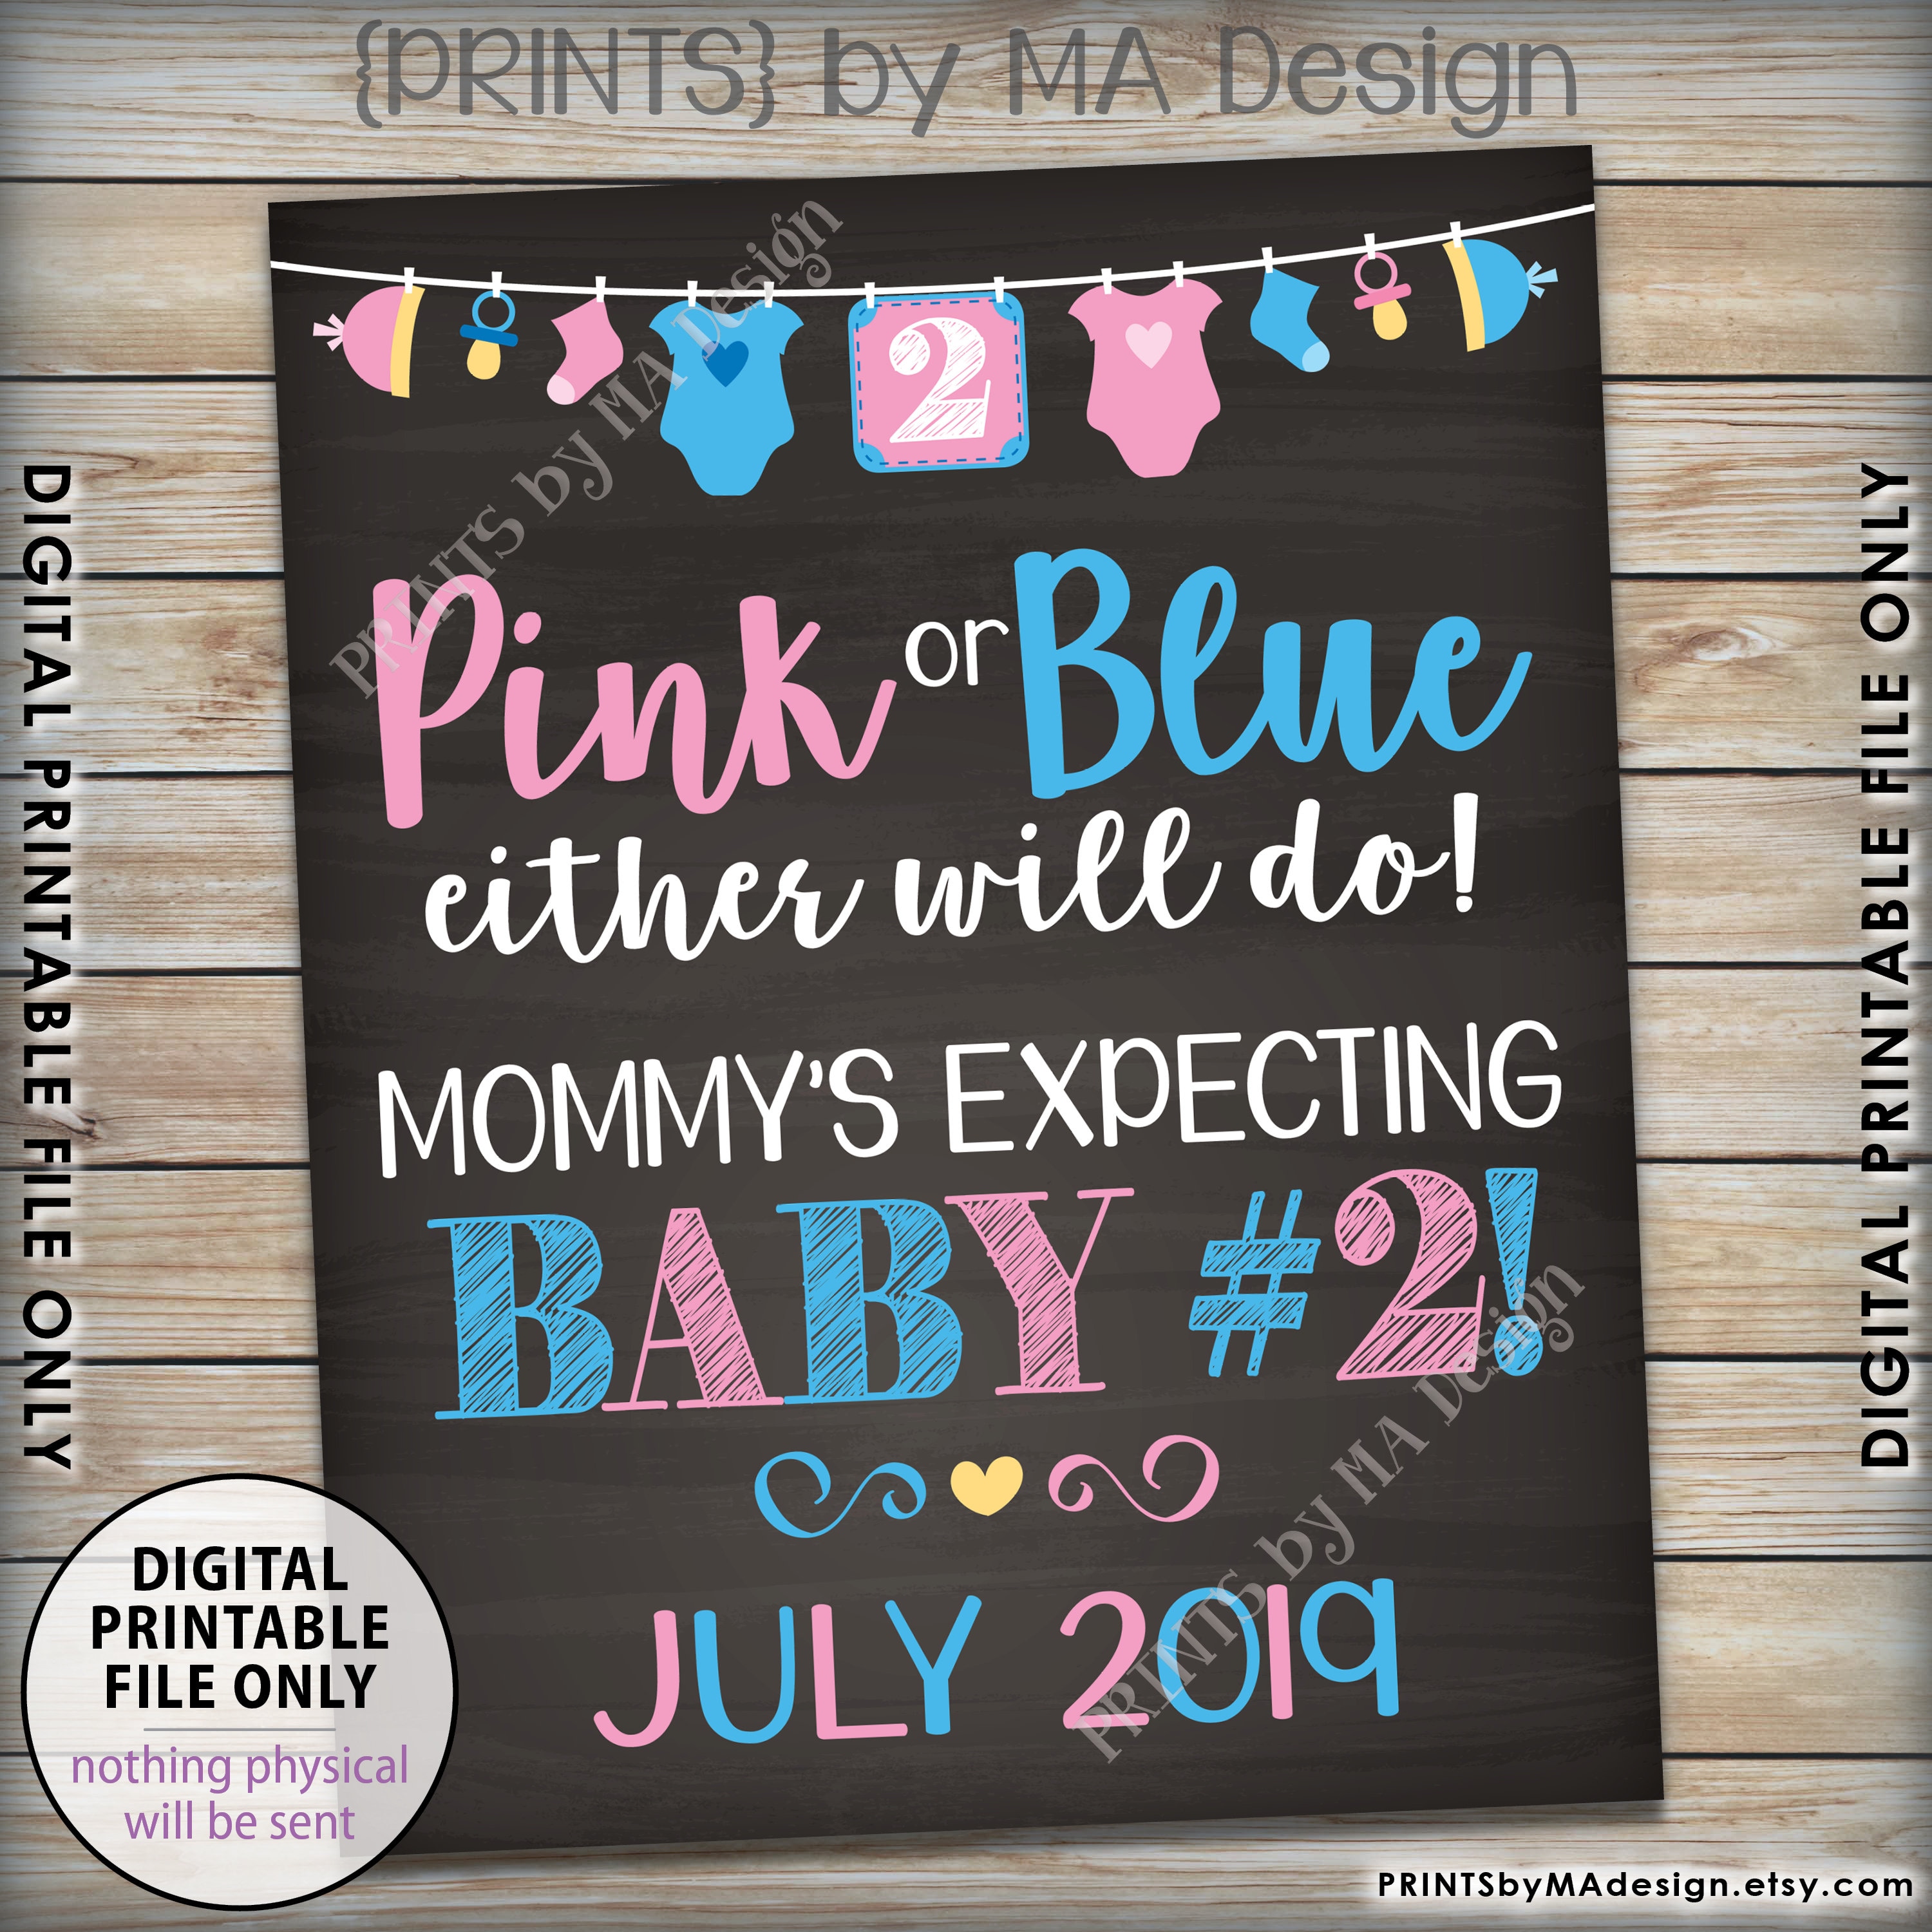 Baby Number 2 Pregnancy Announcement, Pink or Blue Baby Either Will Do